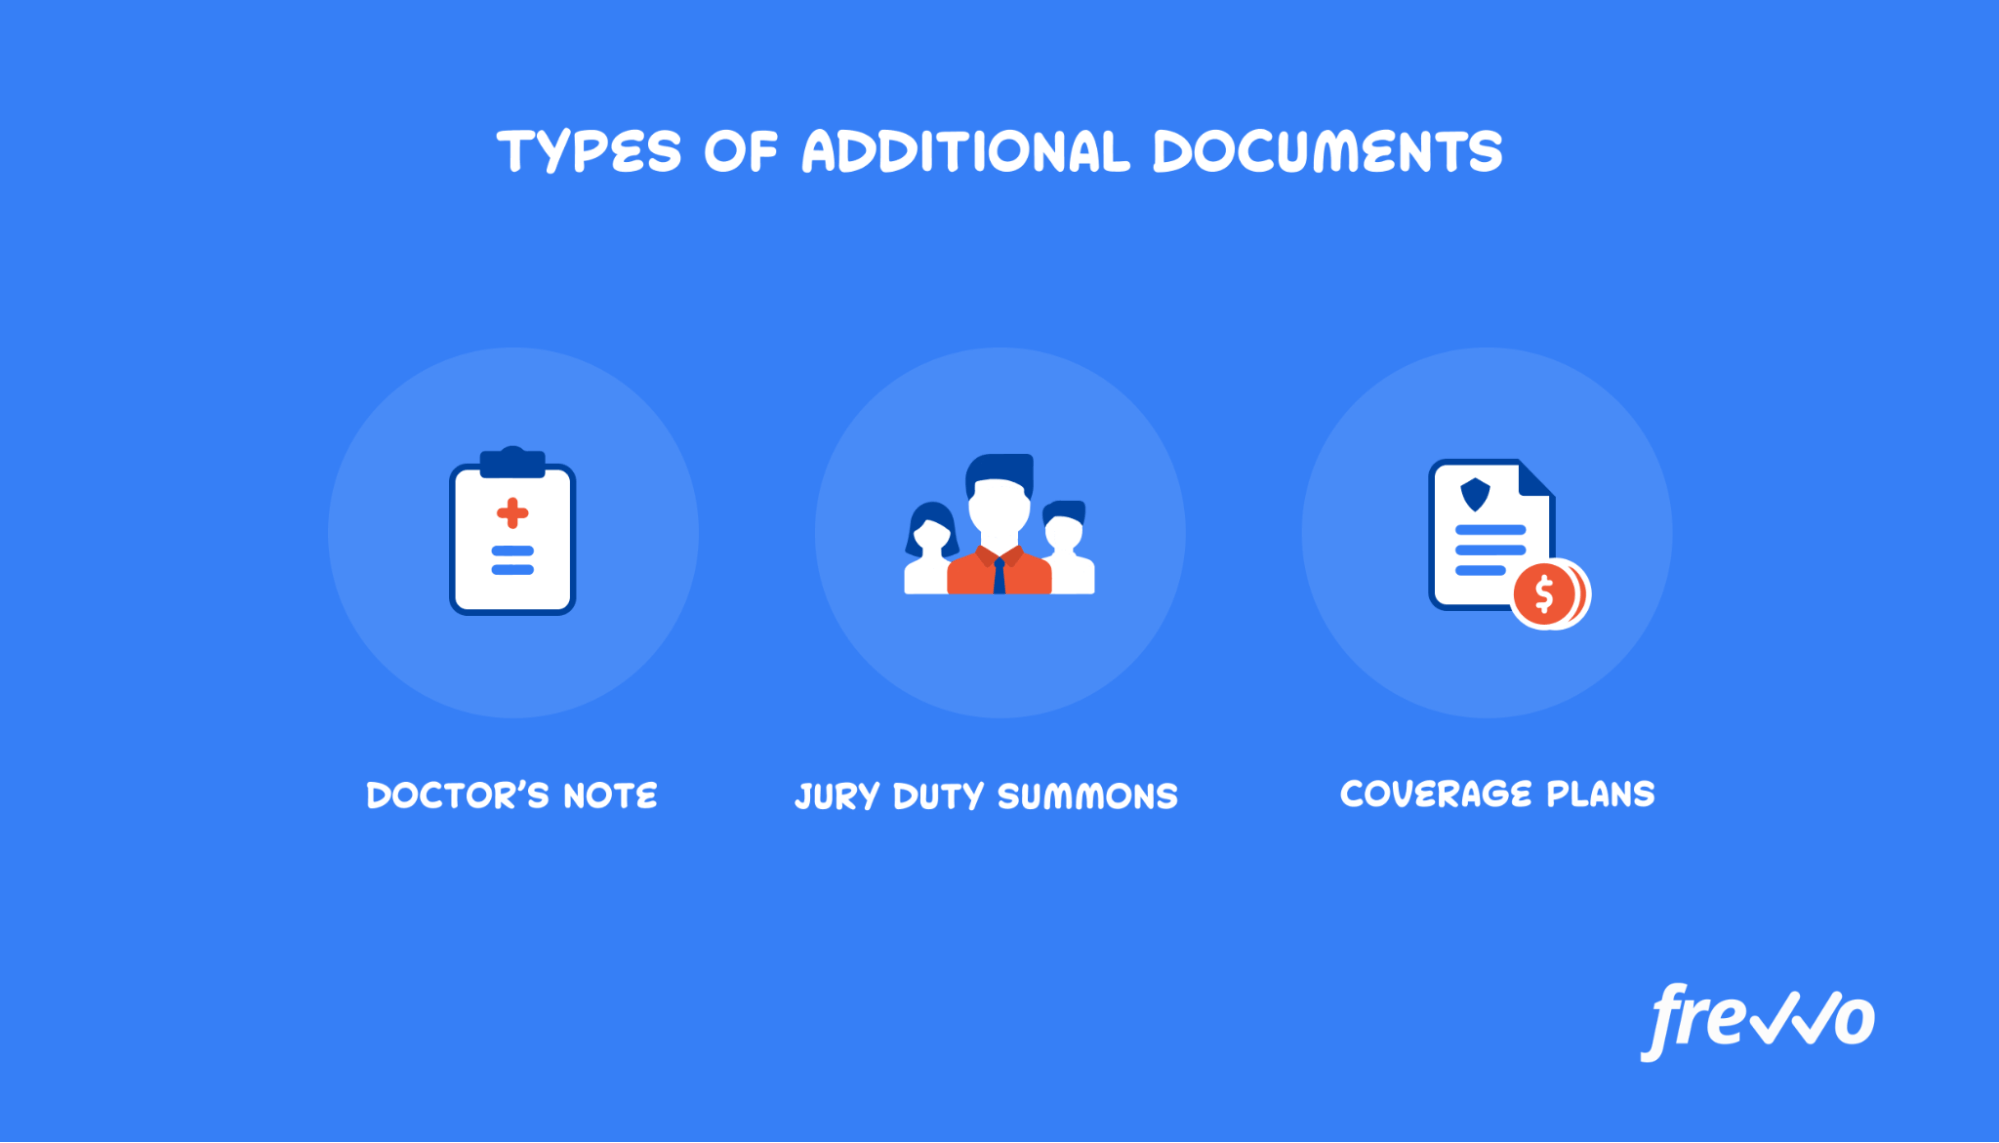 Icons representing types of documentation you might ask for on a leave form, such as doctor’s note, jury duty summons, etc